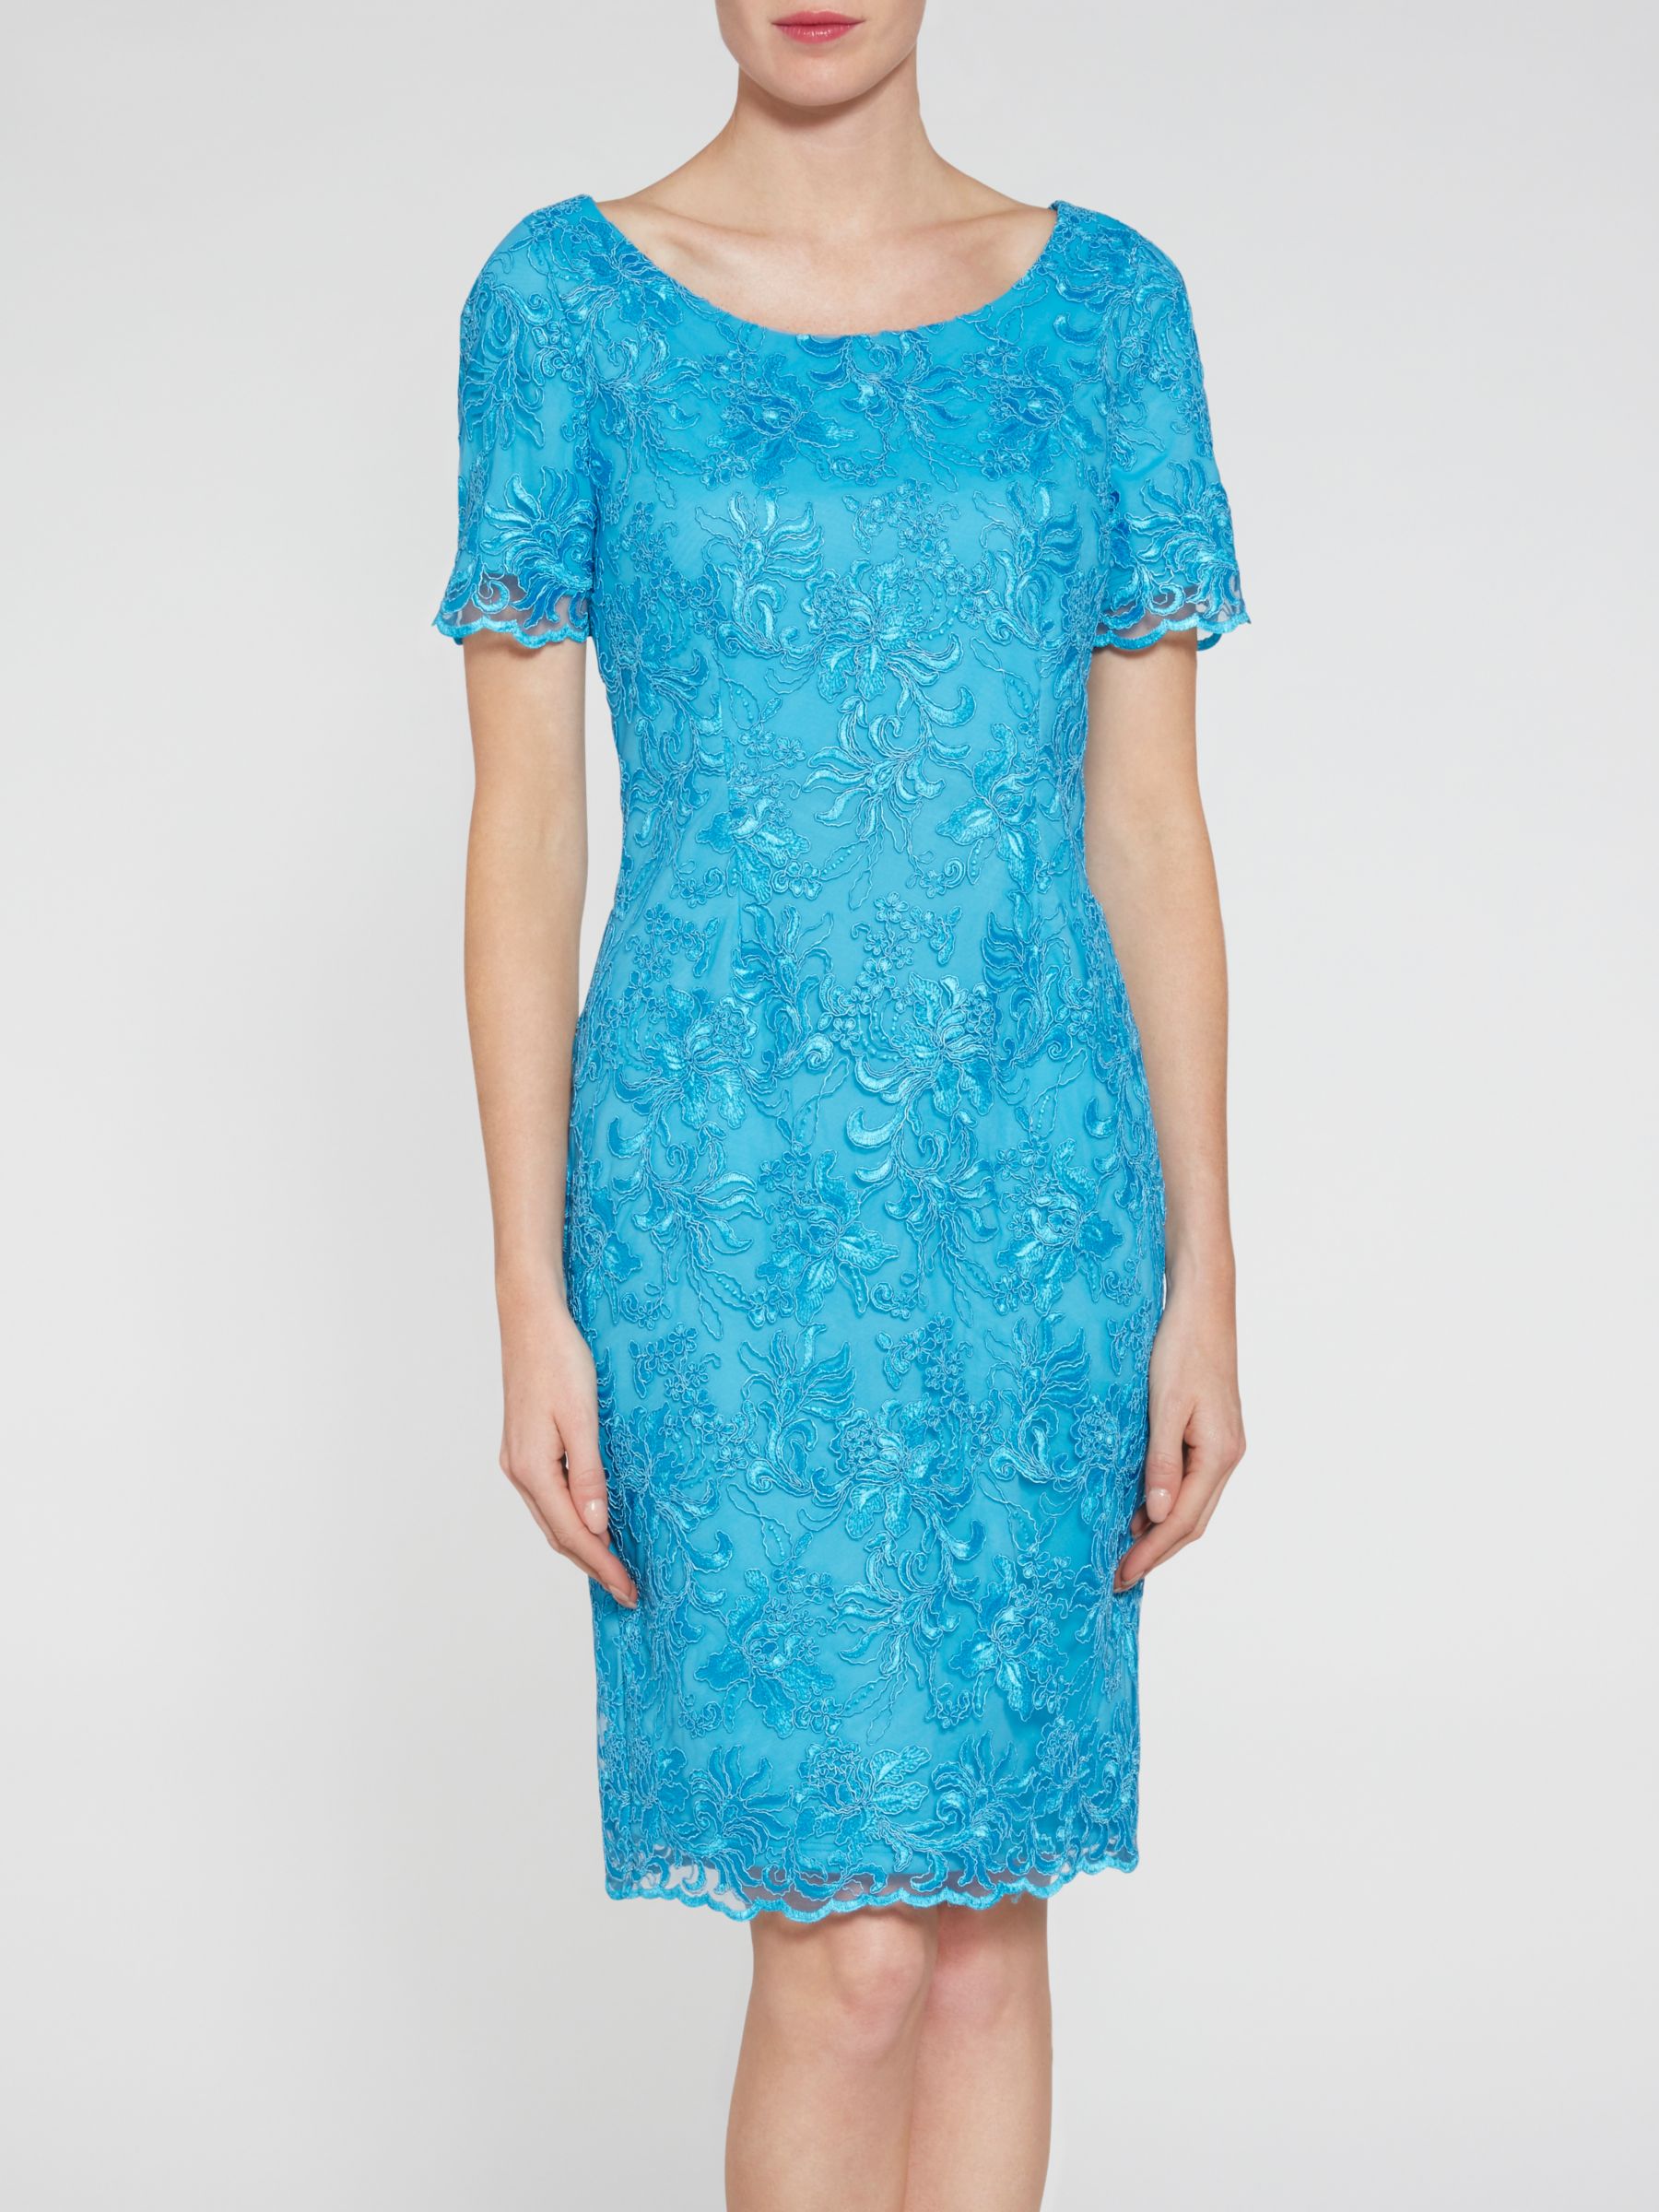 Gina Bacconi Embroidered Corded Dress at John Lewis